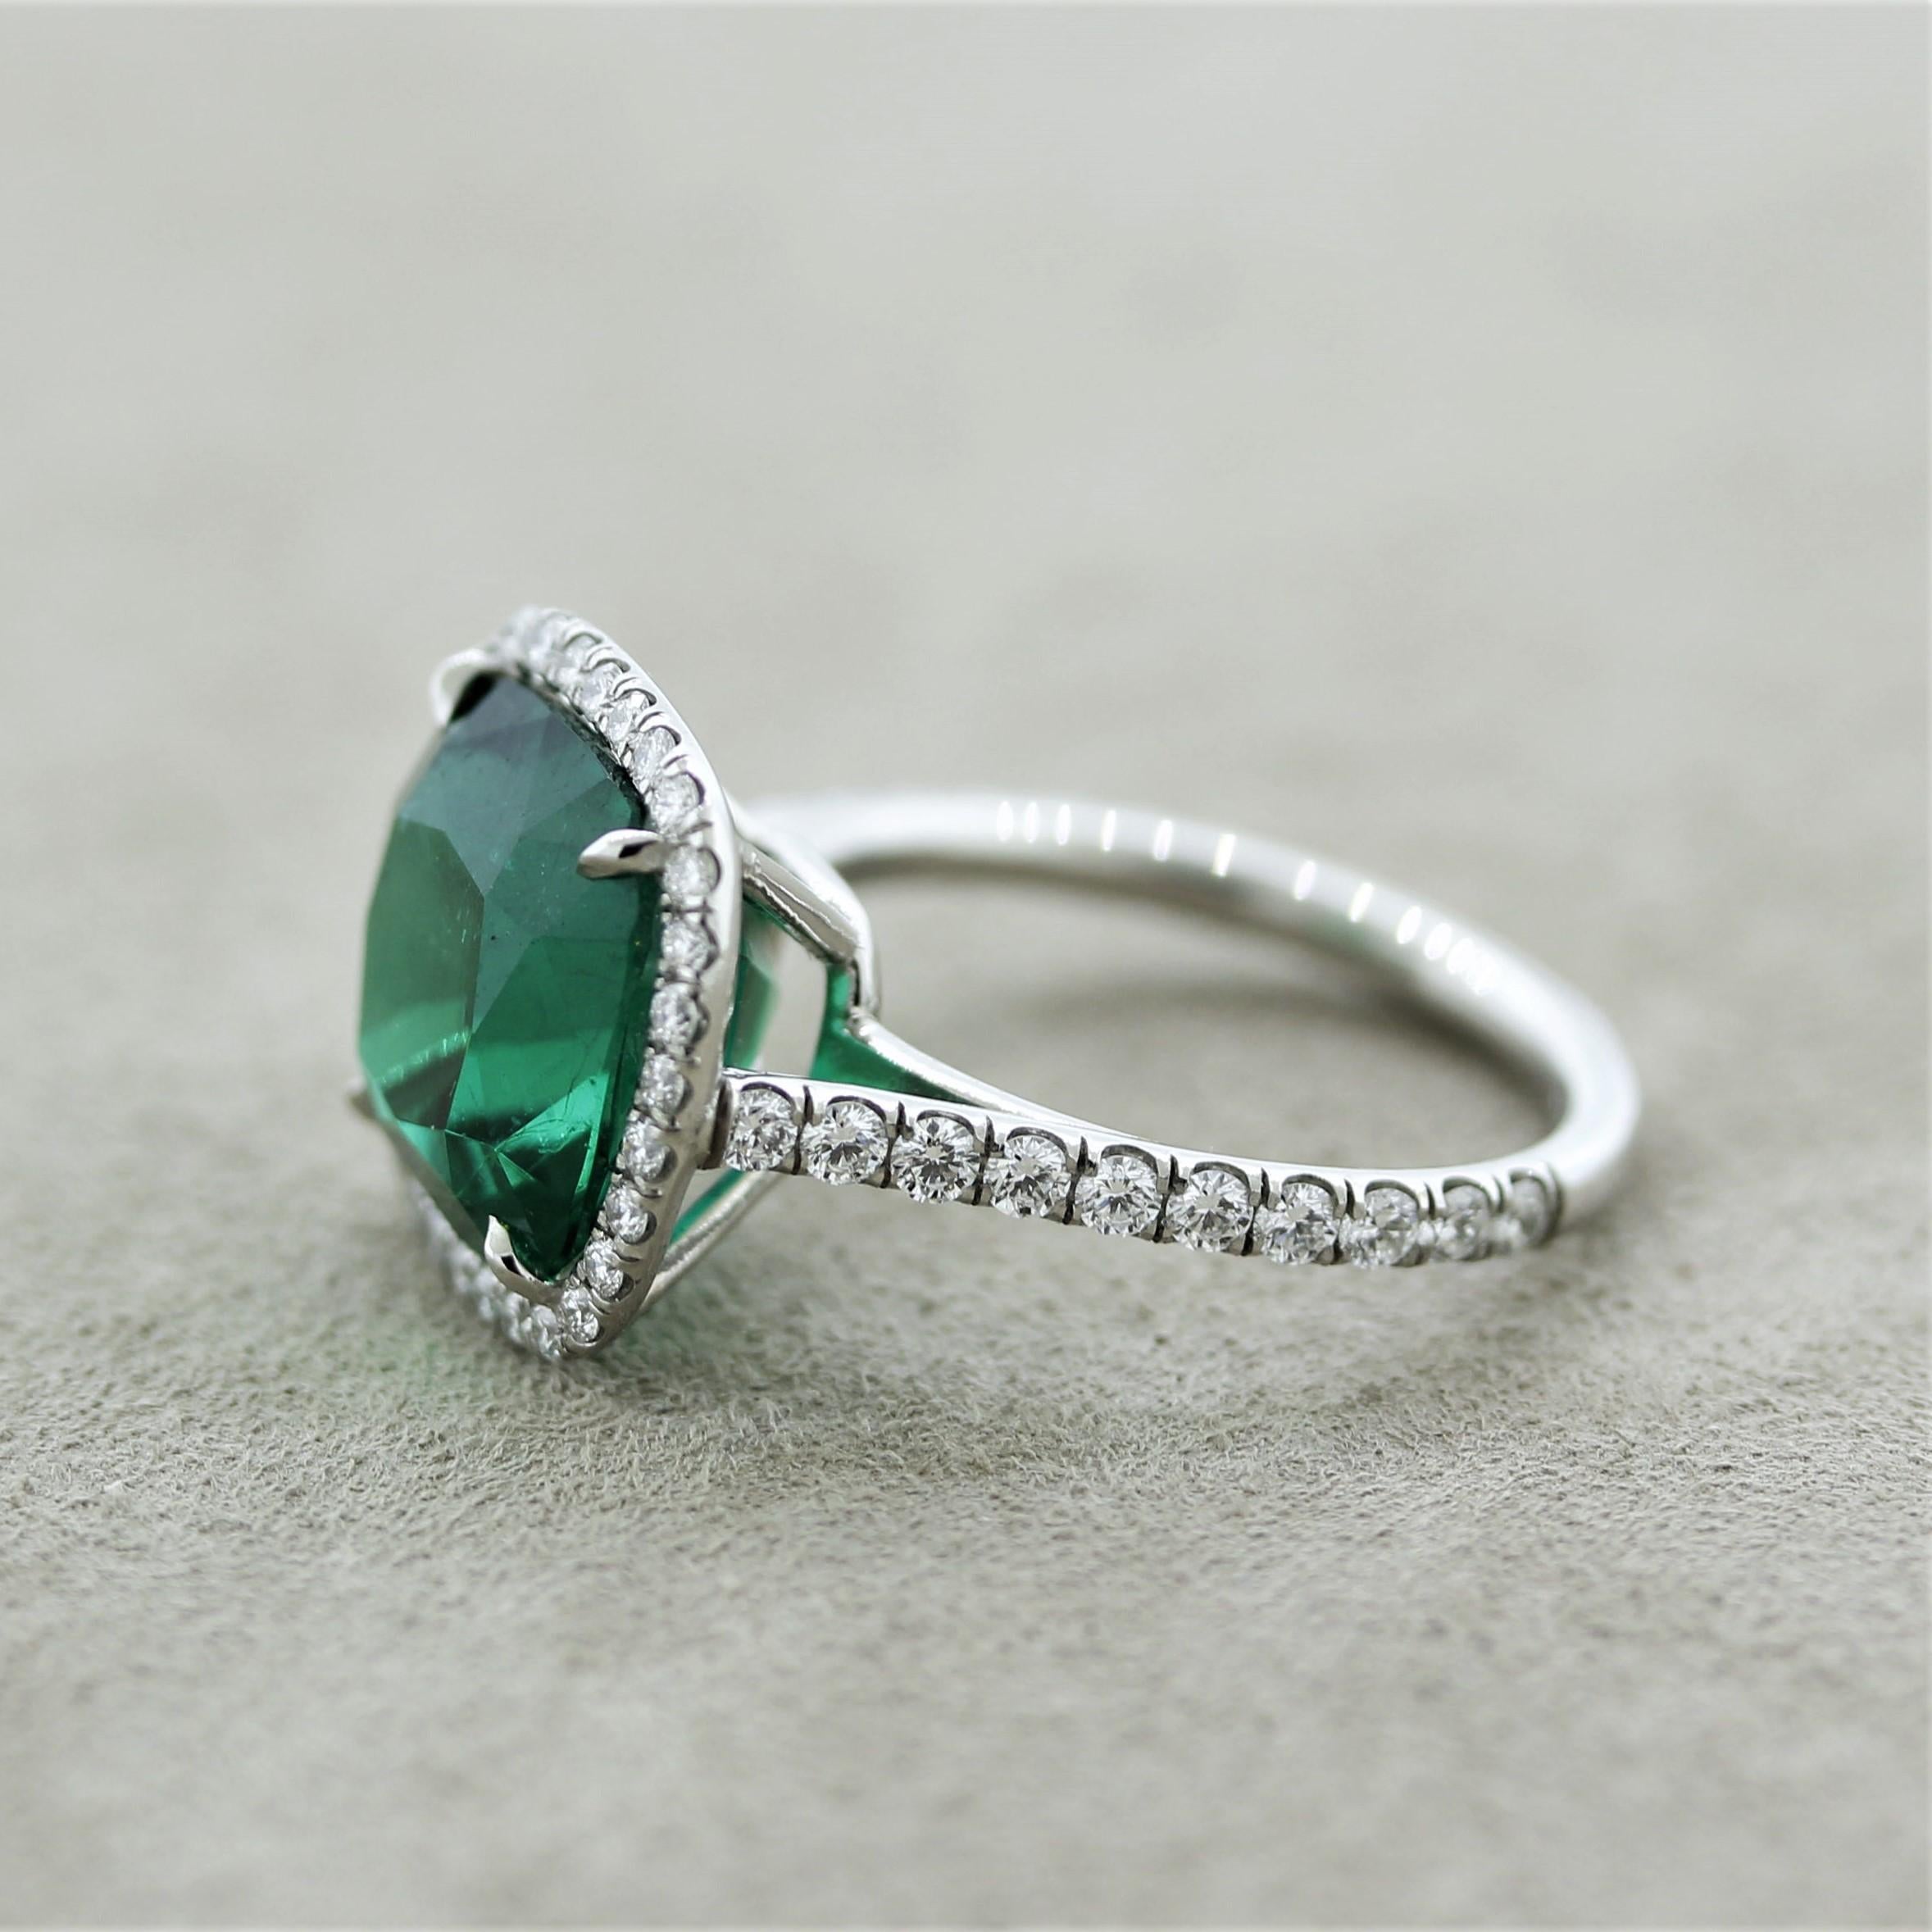 Mixed Cut Spectacular Emerald Diamond Platinum Ring, AGL Certified For Sale